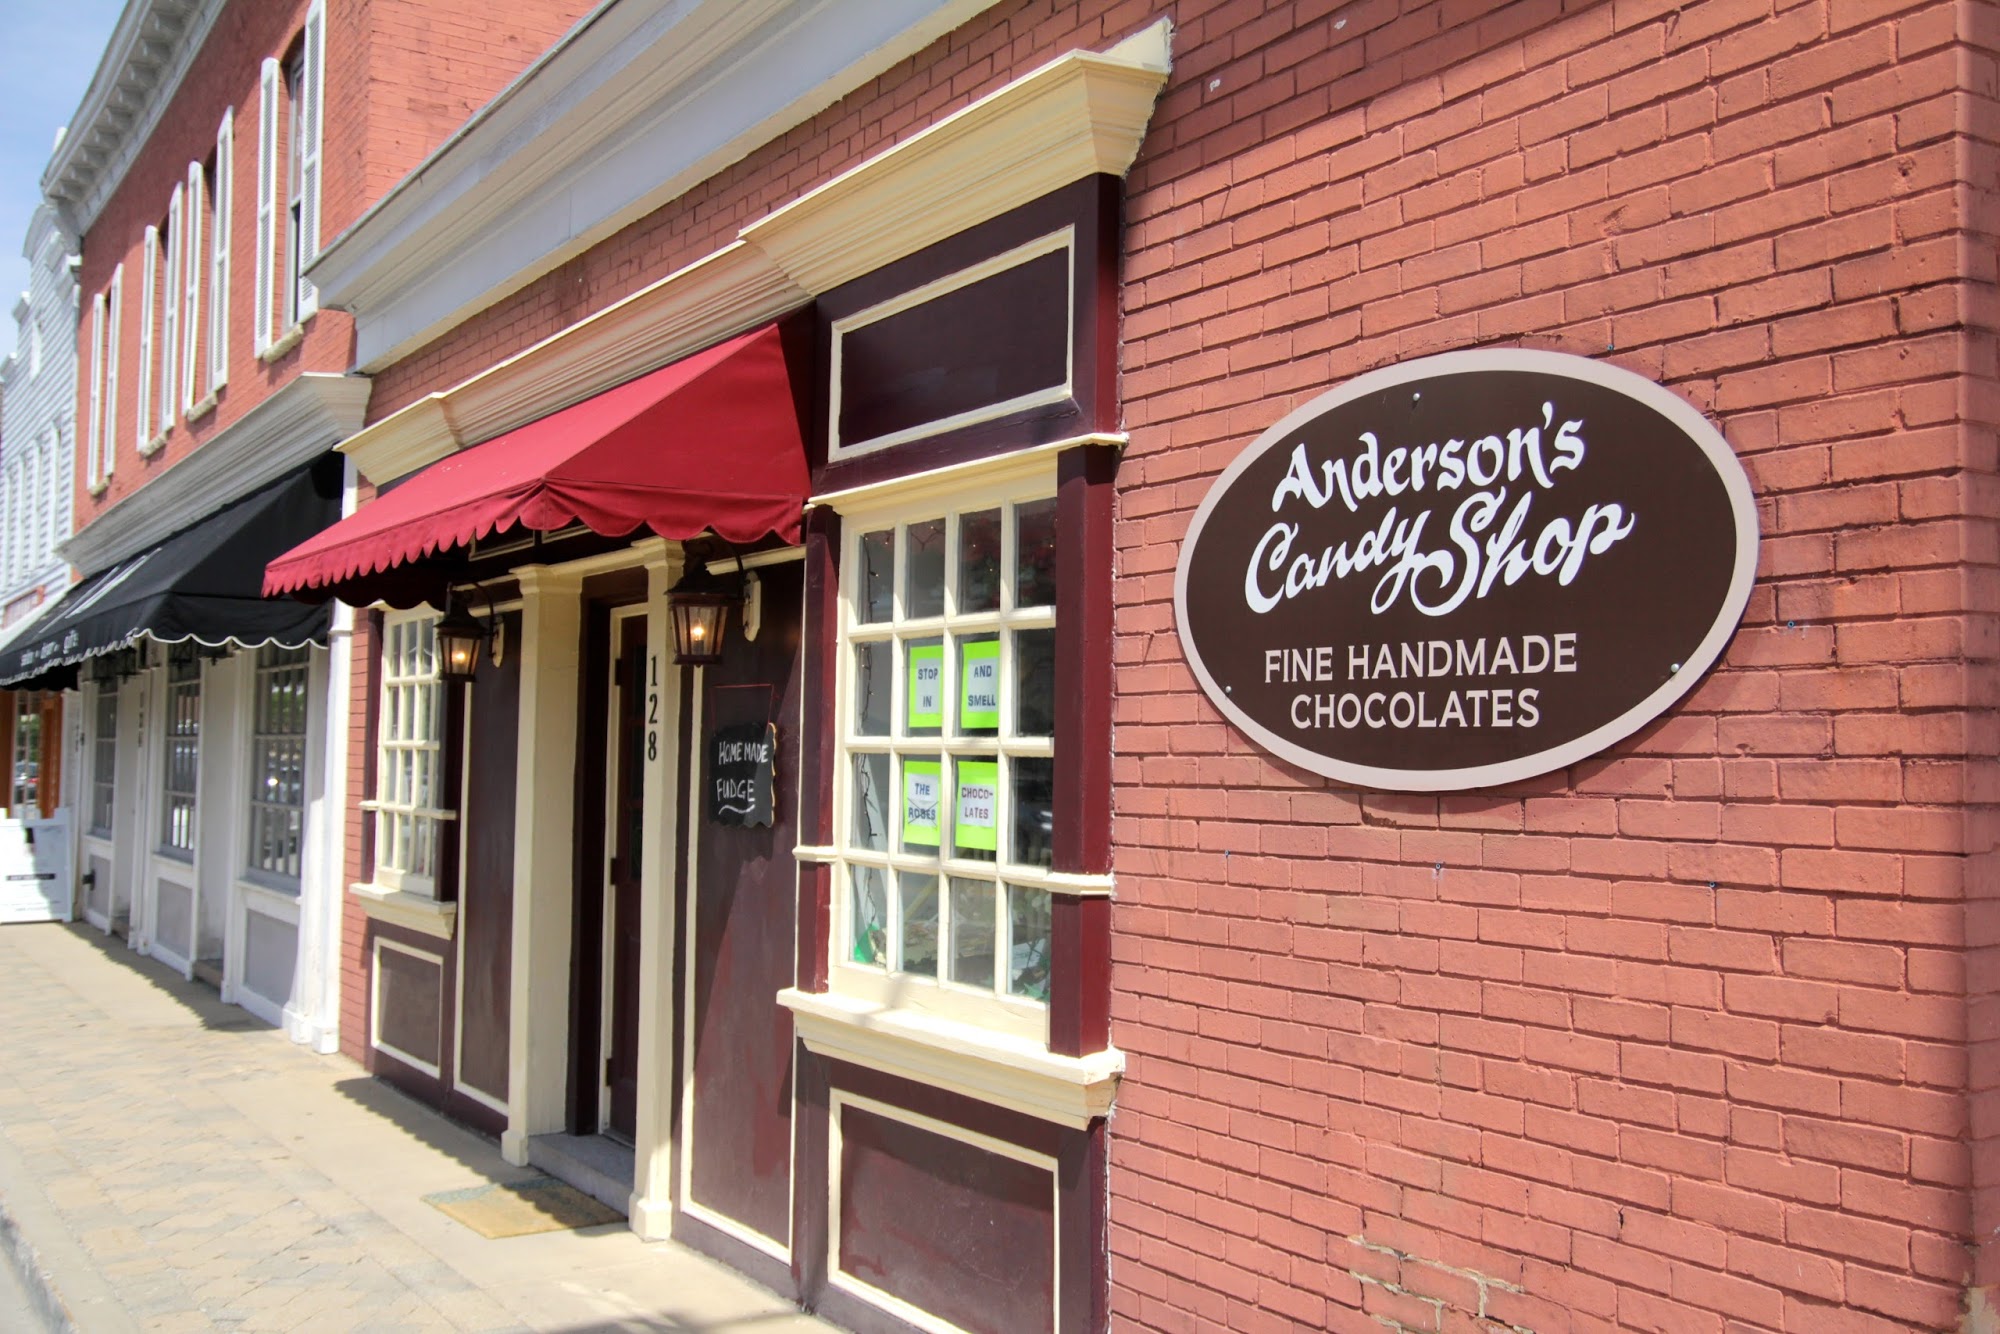 Anderson's Candy Shop